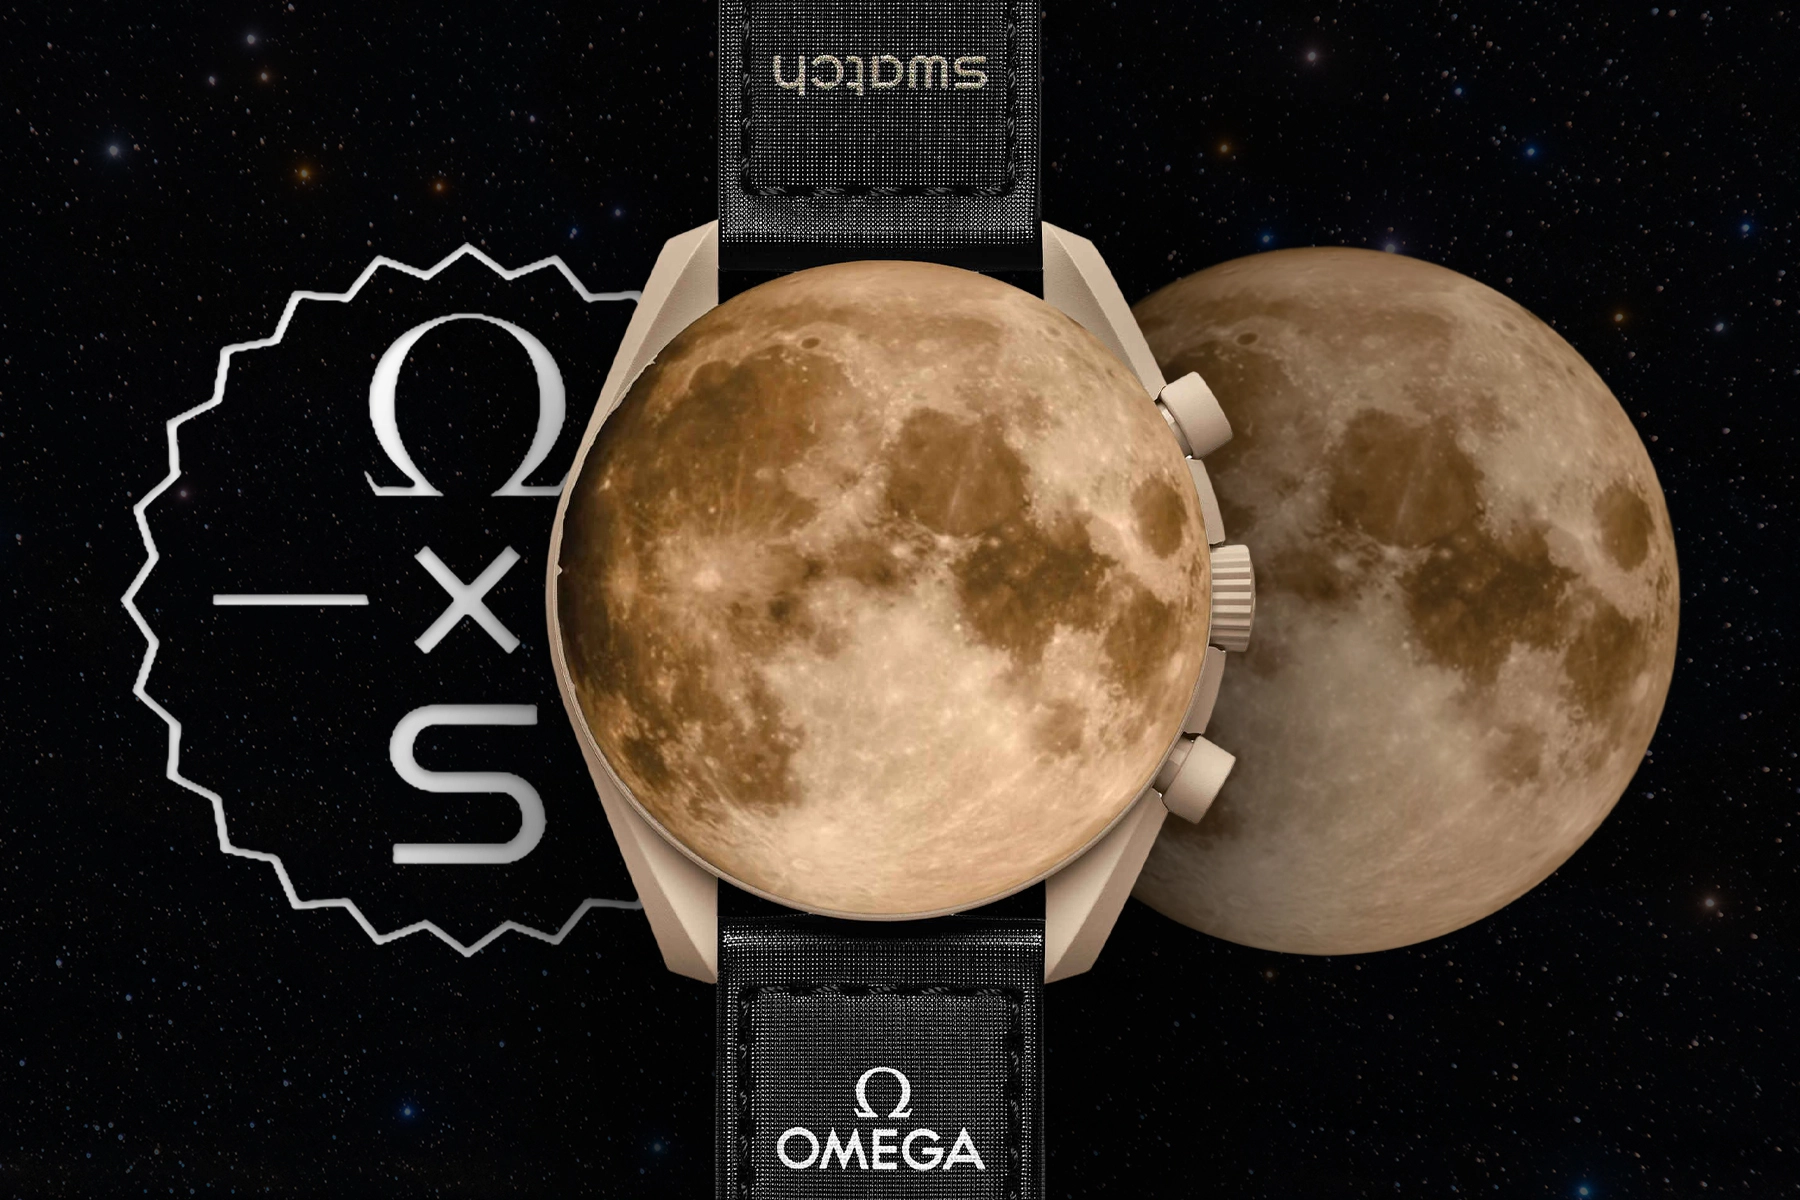 A New Moonswatch To Be Launched By Omega And Swatch